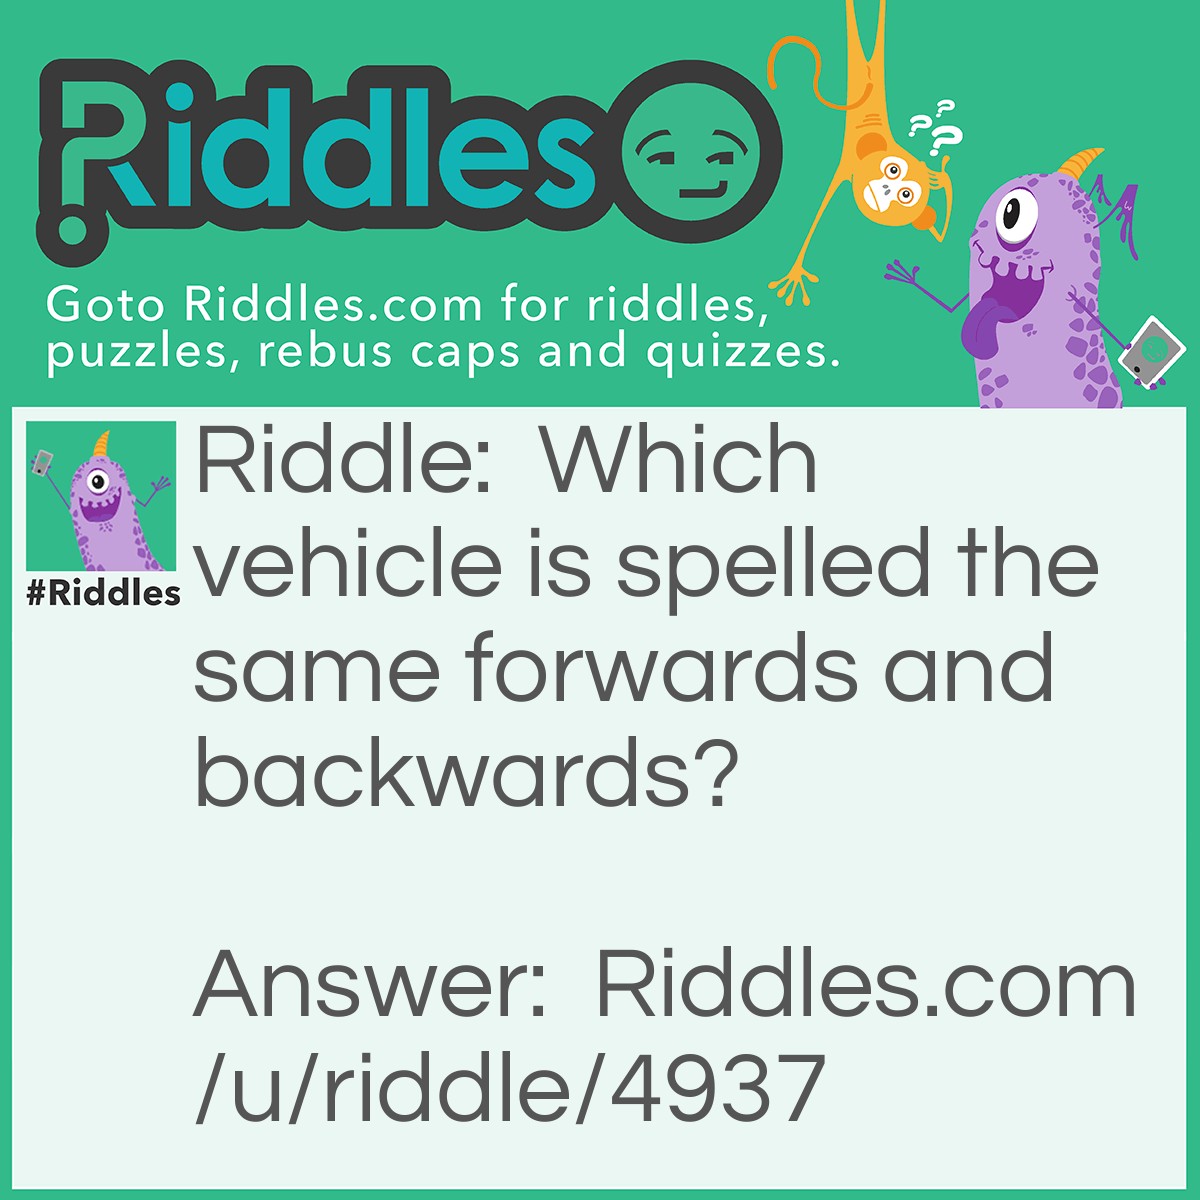 Riddle: Which vehicle is spelled the same forwards and backwards? Answer: Racecar.